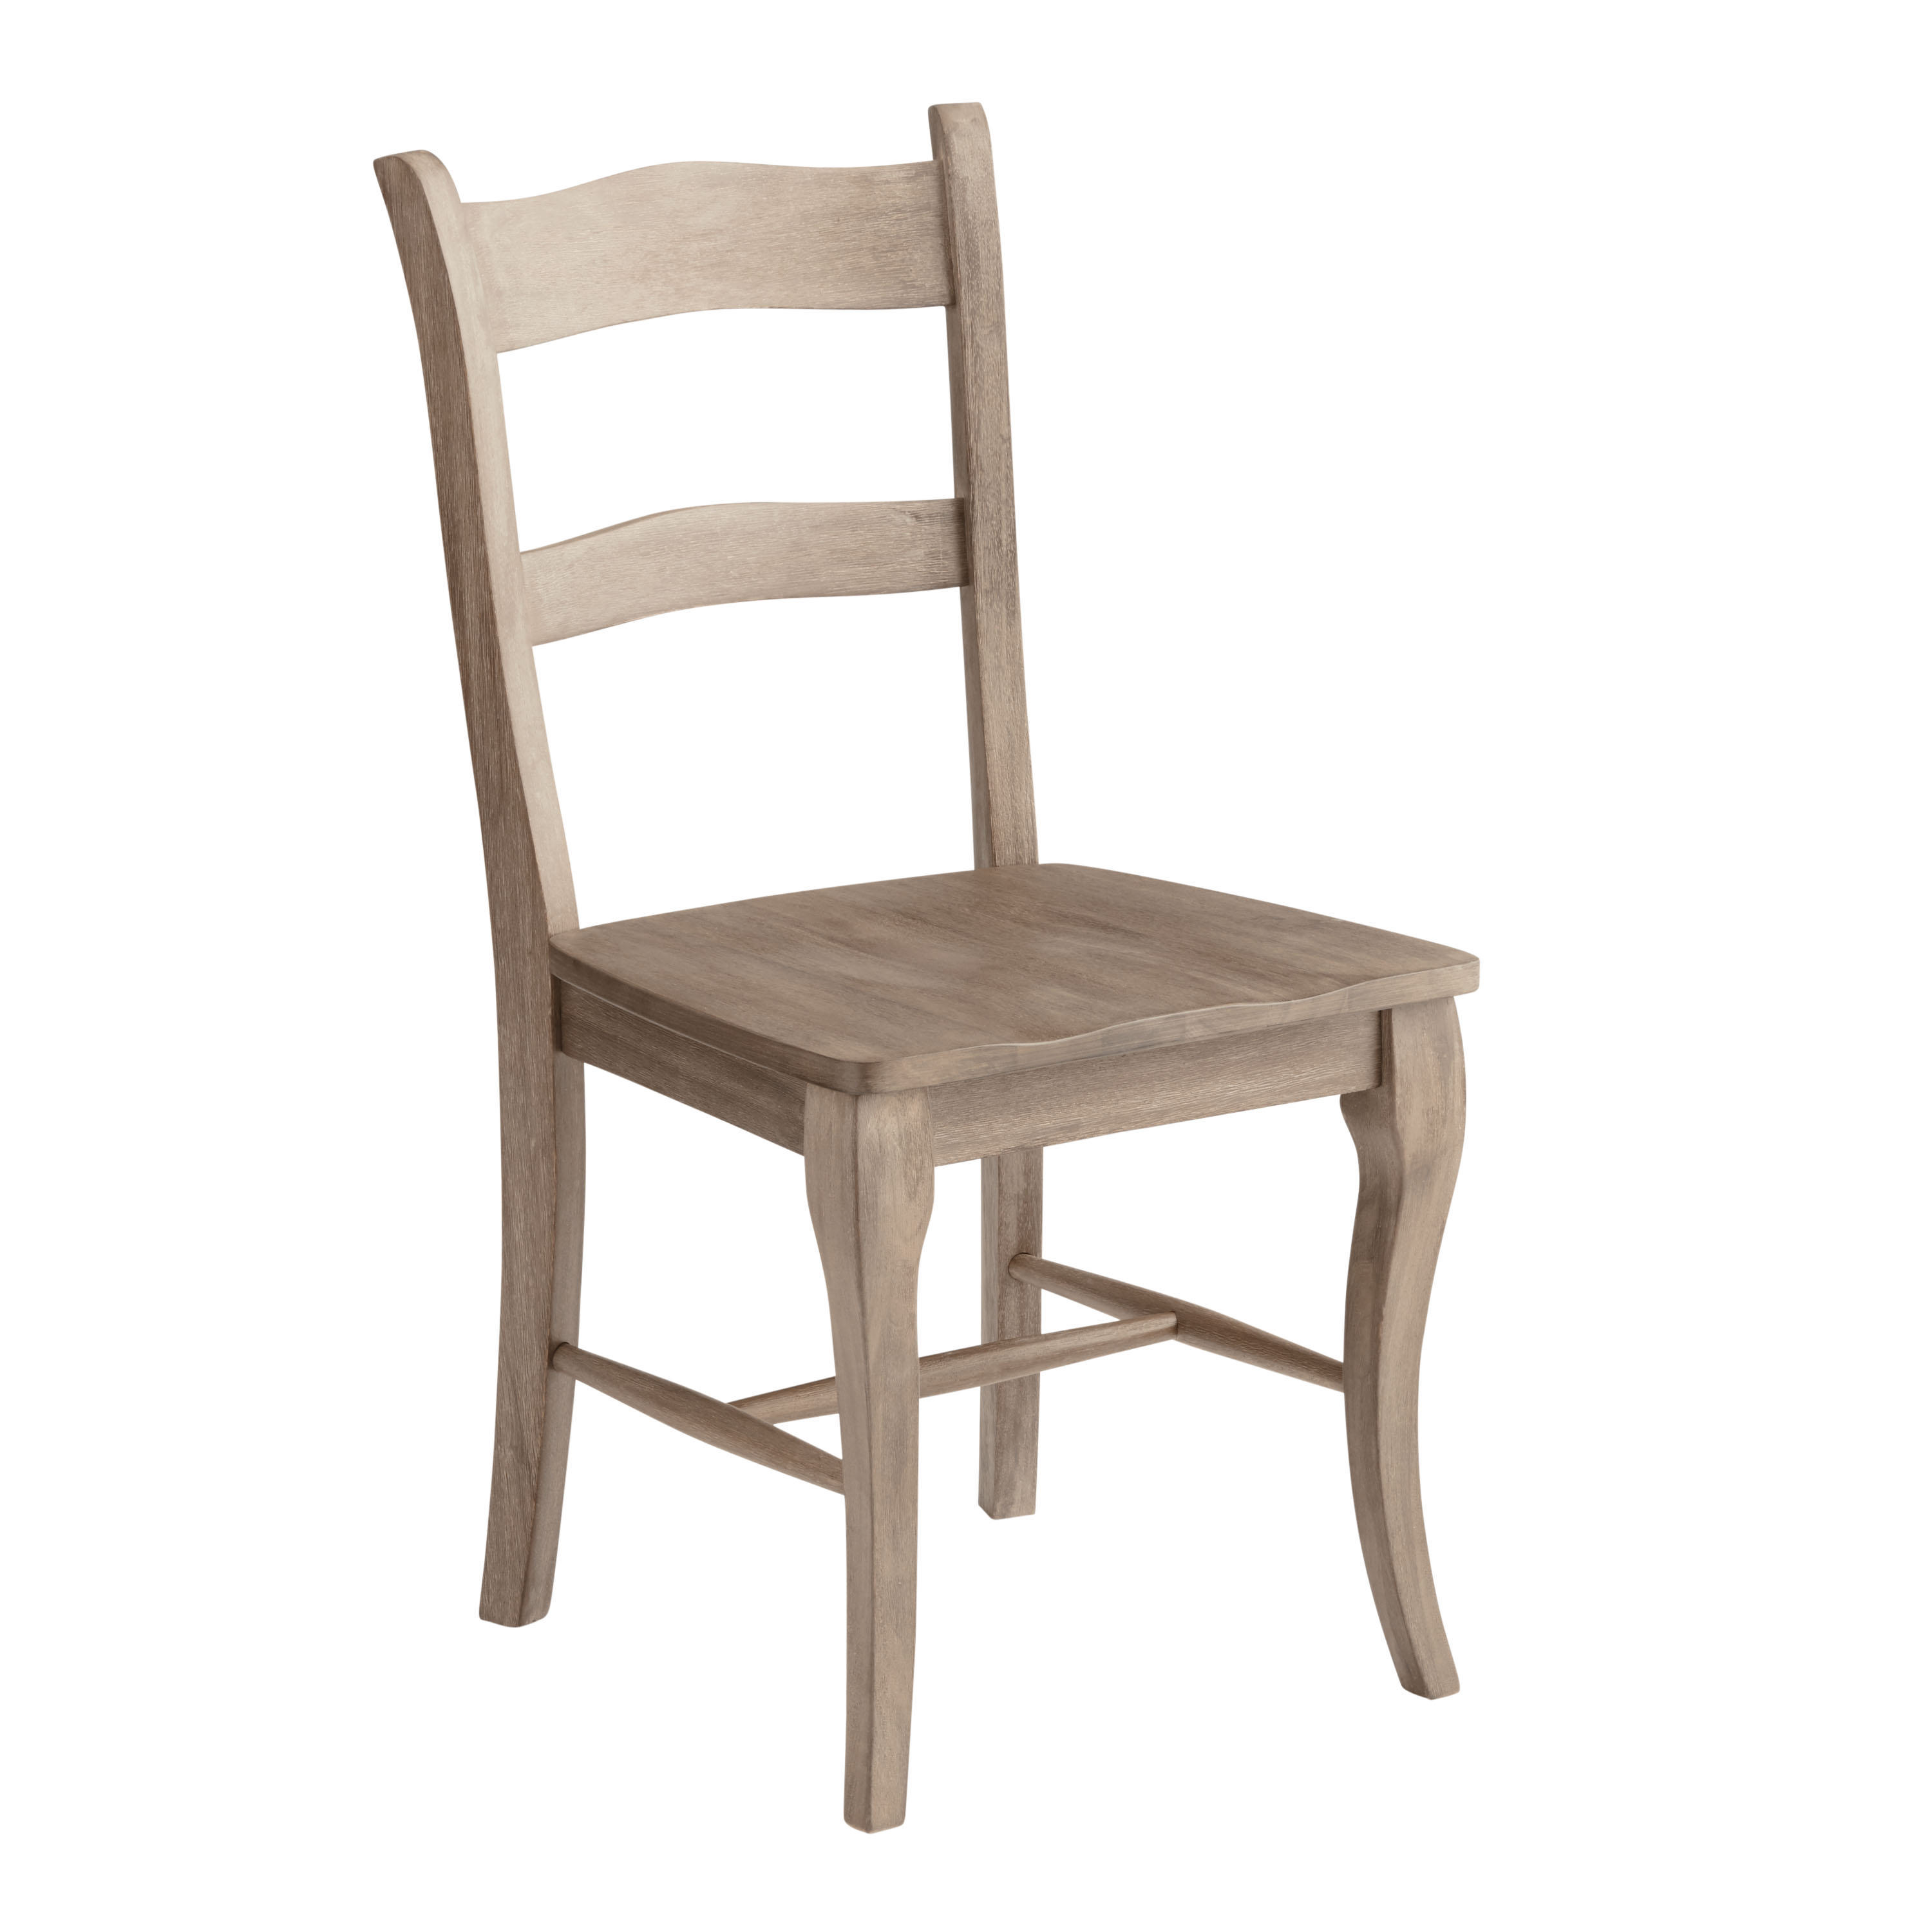 Jozy Weathered Gray Wood Dining Chair Set of 2 - World Market